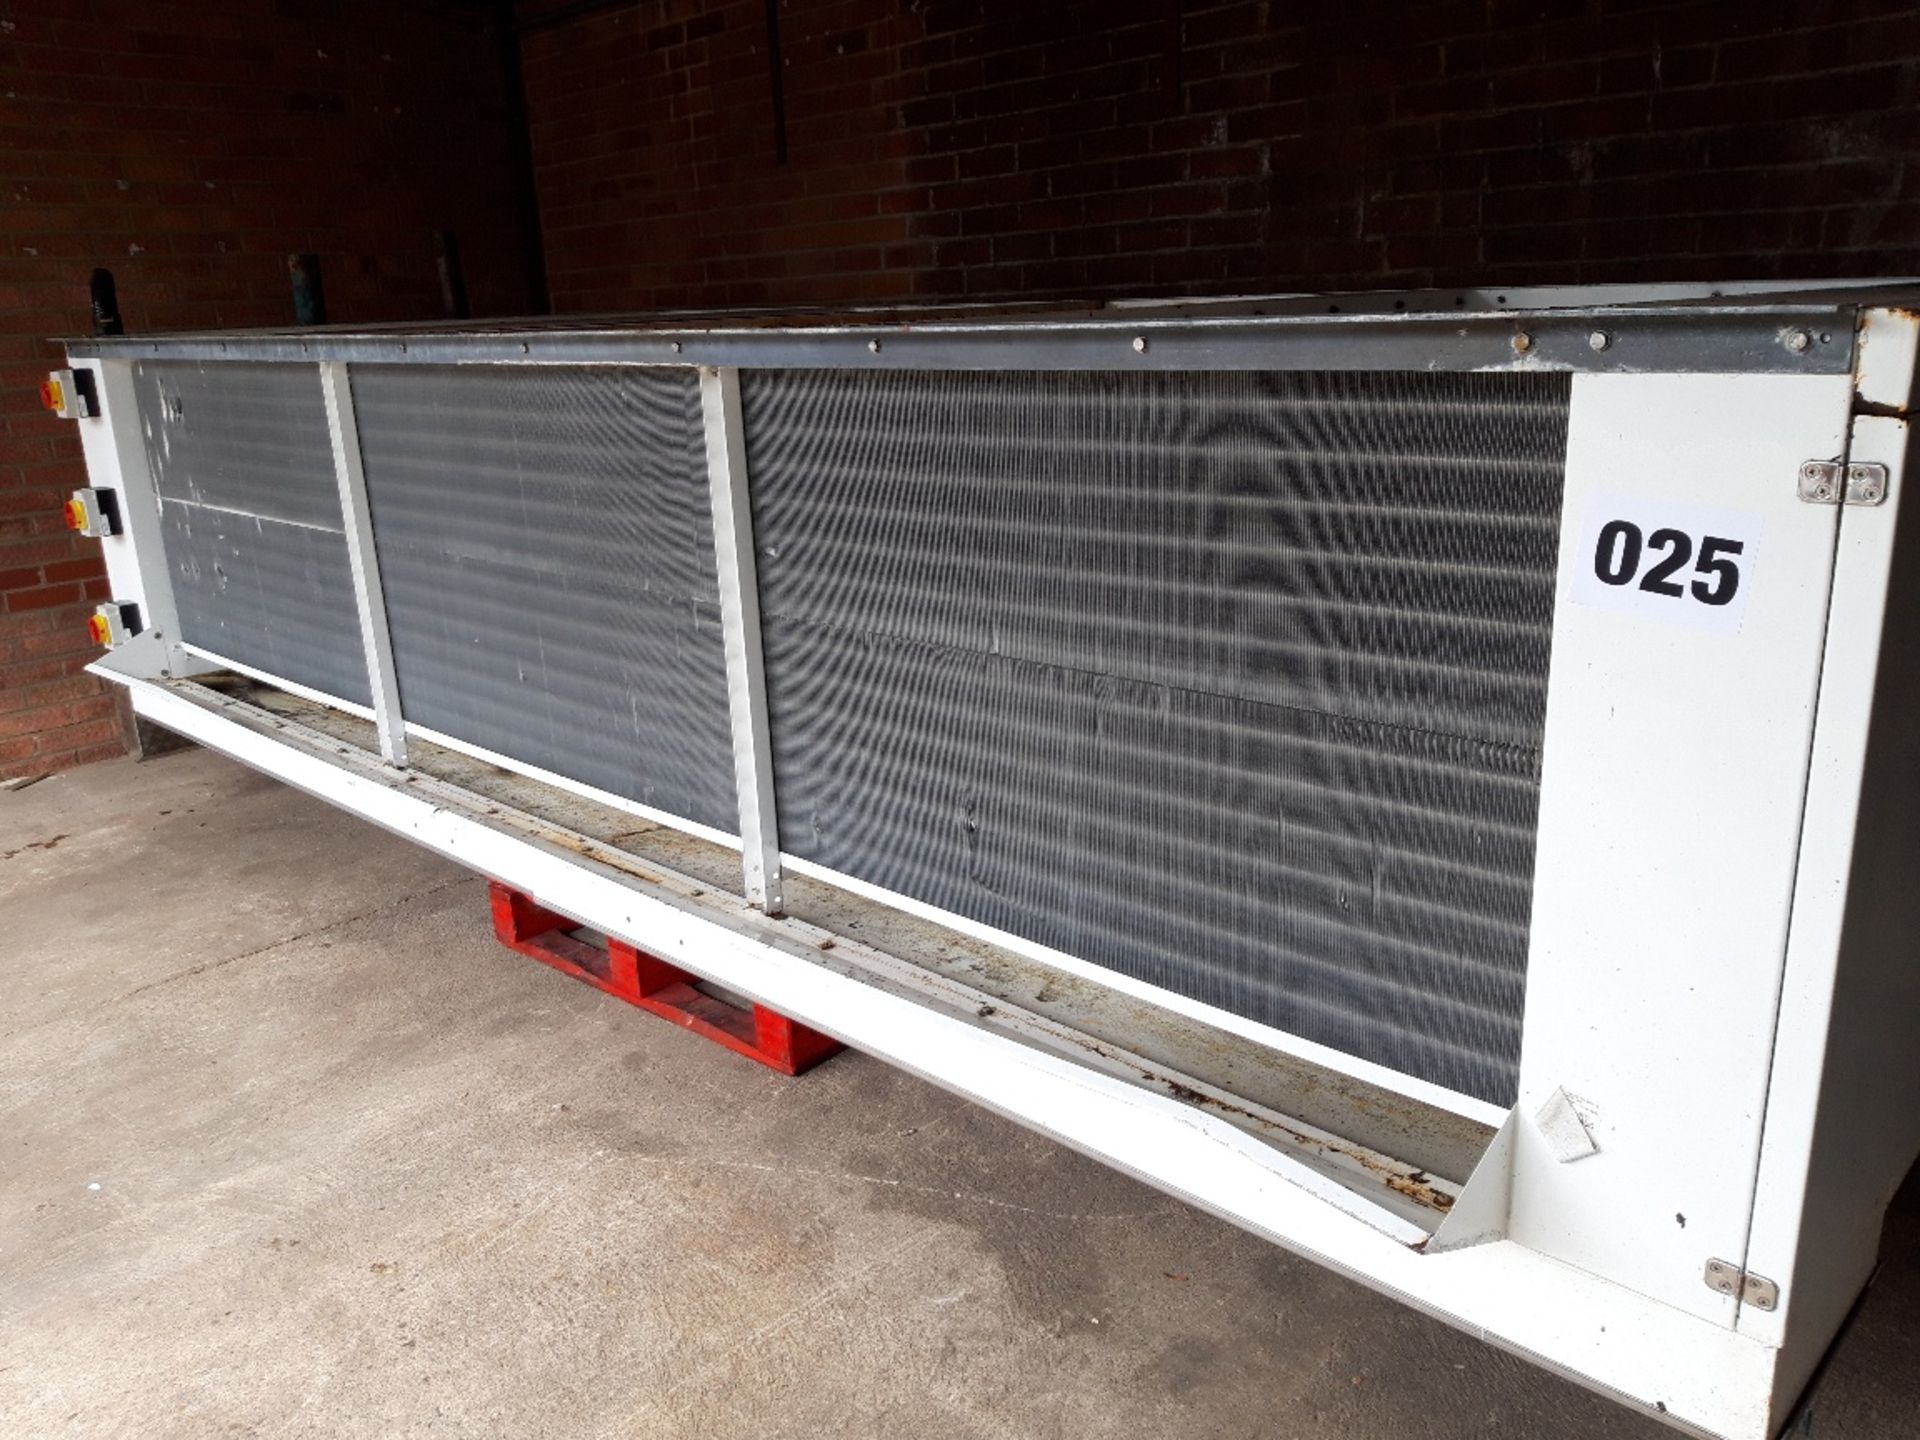 Evaporator Model DDL 6 - 180 by Heating + Cooling Coils. Lift out £80was working in factory.